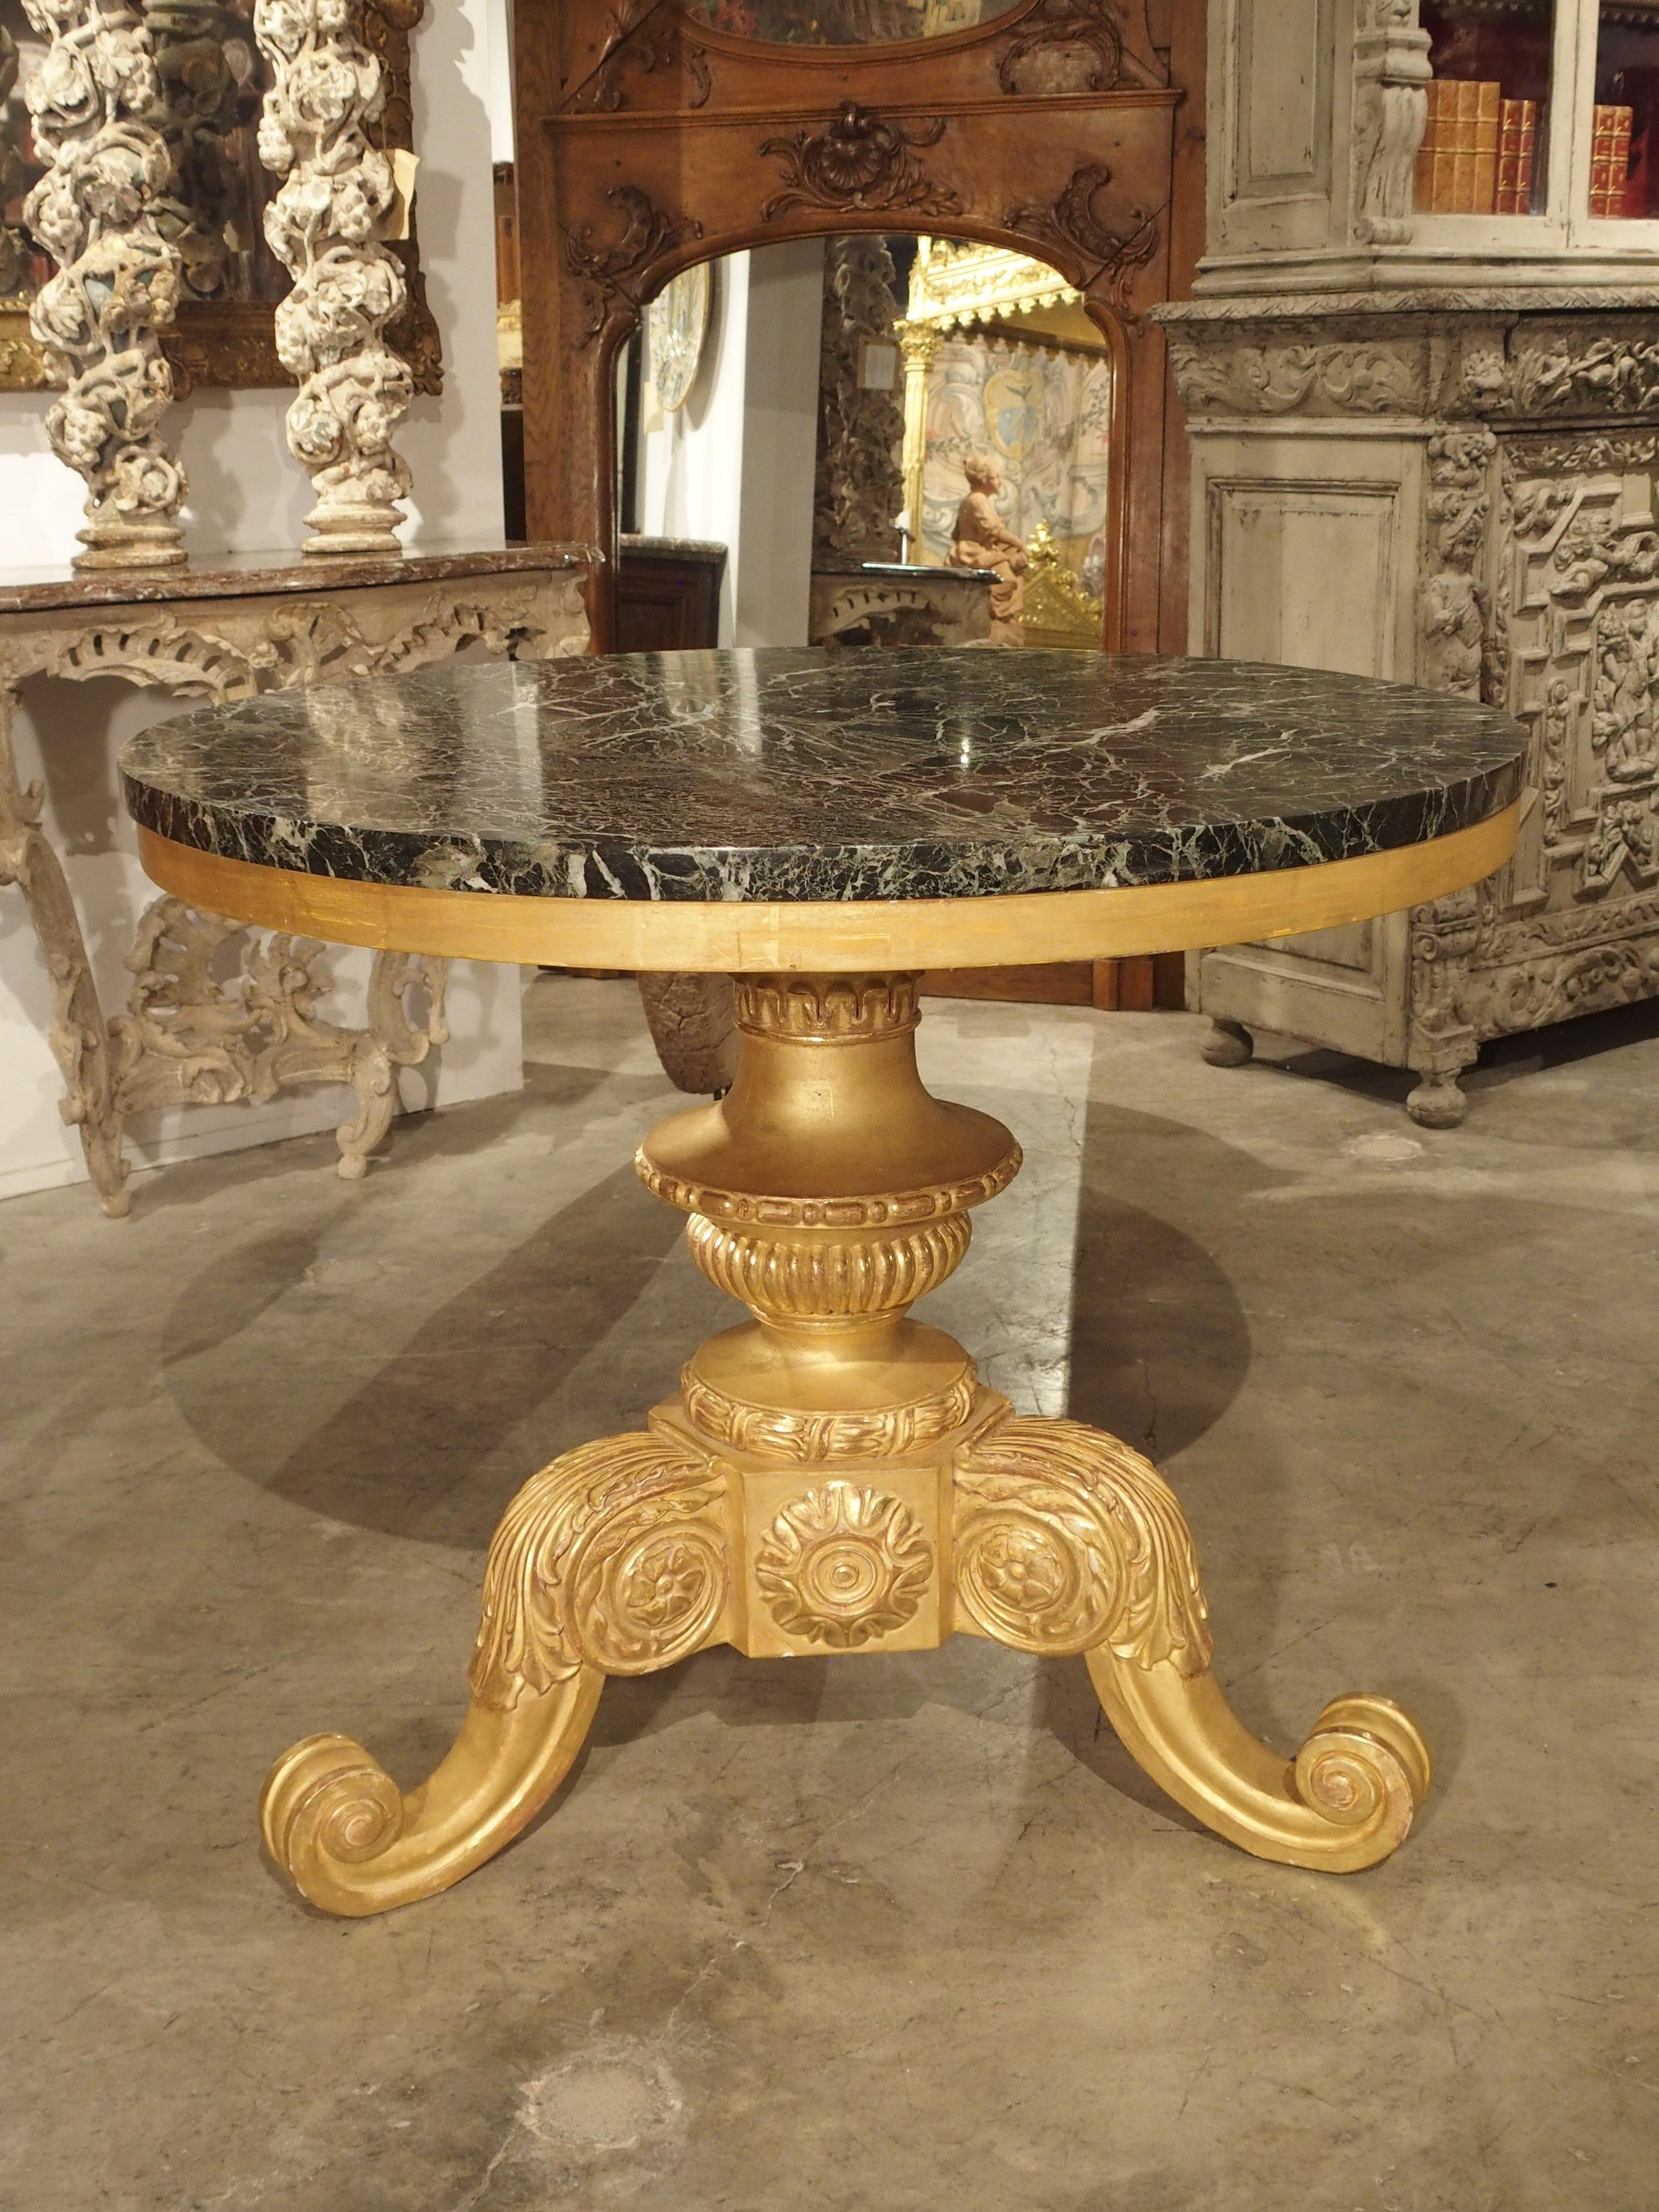 This circular tripartite giltwood and marble center table was produced in France in the early 1900’s. The table is in the style of Napoleon III, which is sometimes referred to as The Second Empire style. Napoleon III is unique in that there were no